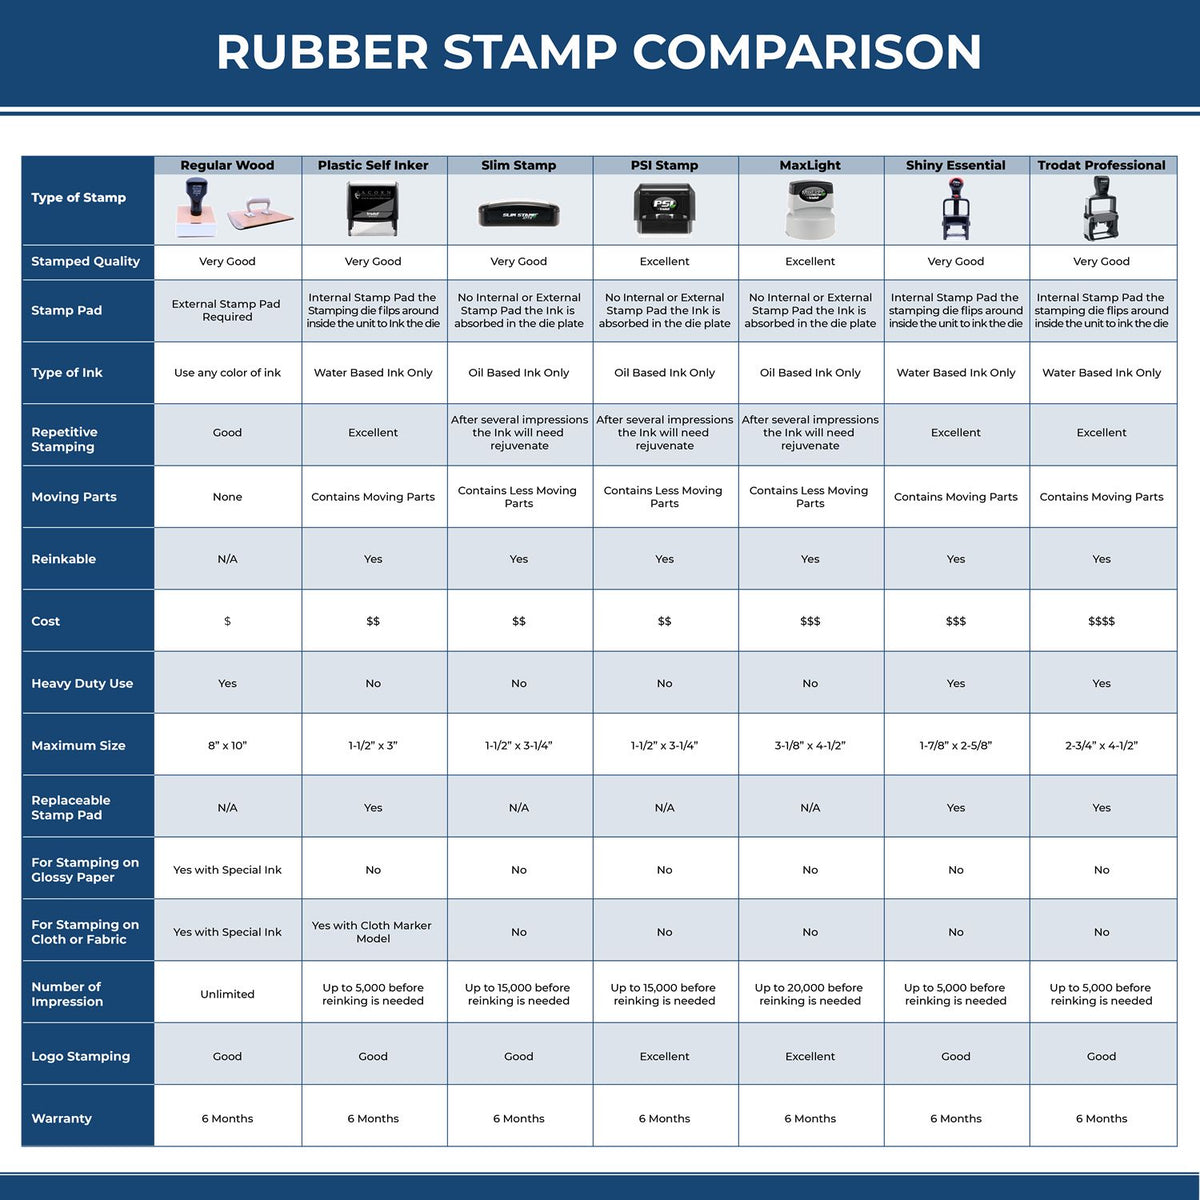 A comparison chart for the different types of mount models available for the Heavy-Duty Oregon Rectangular Notary Stamp.